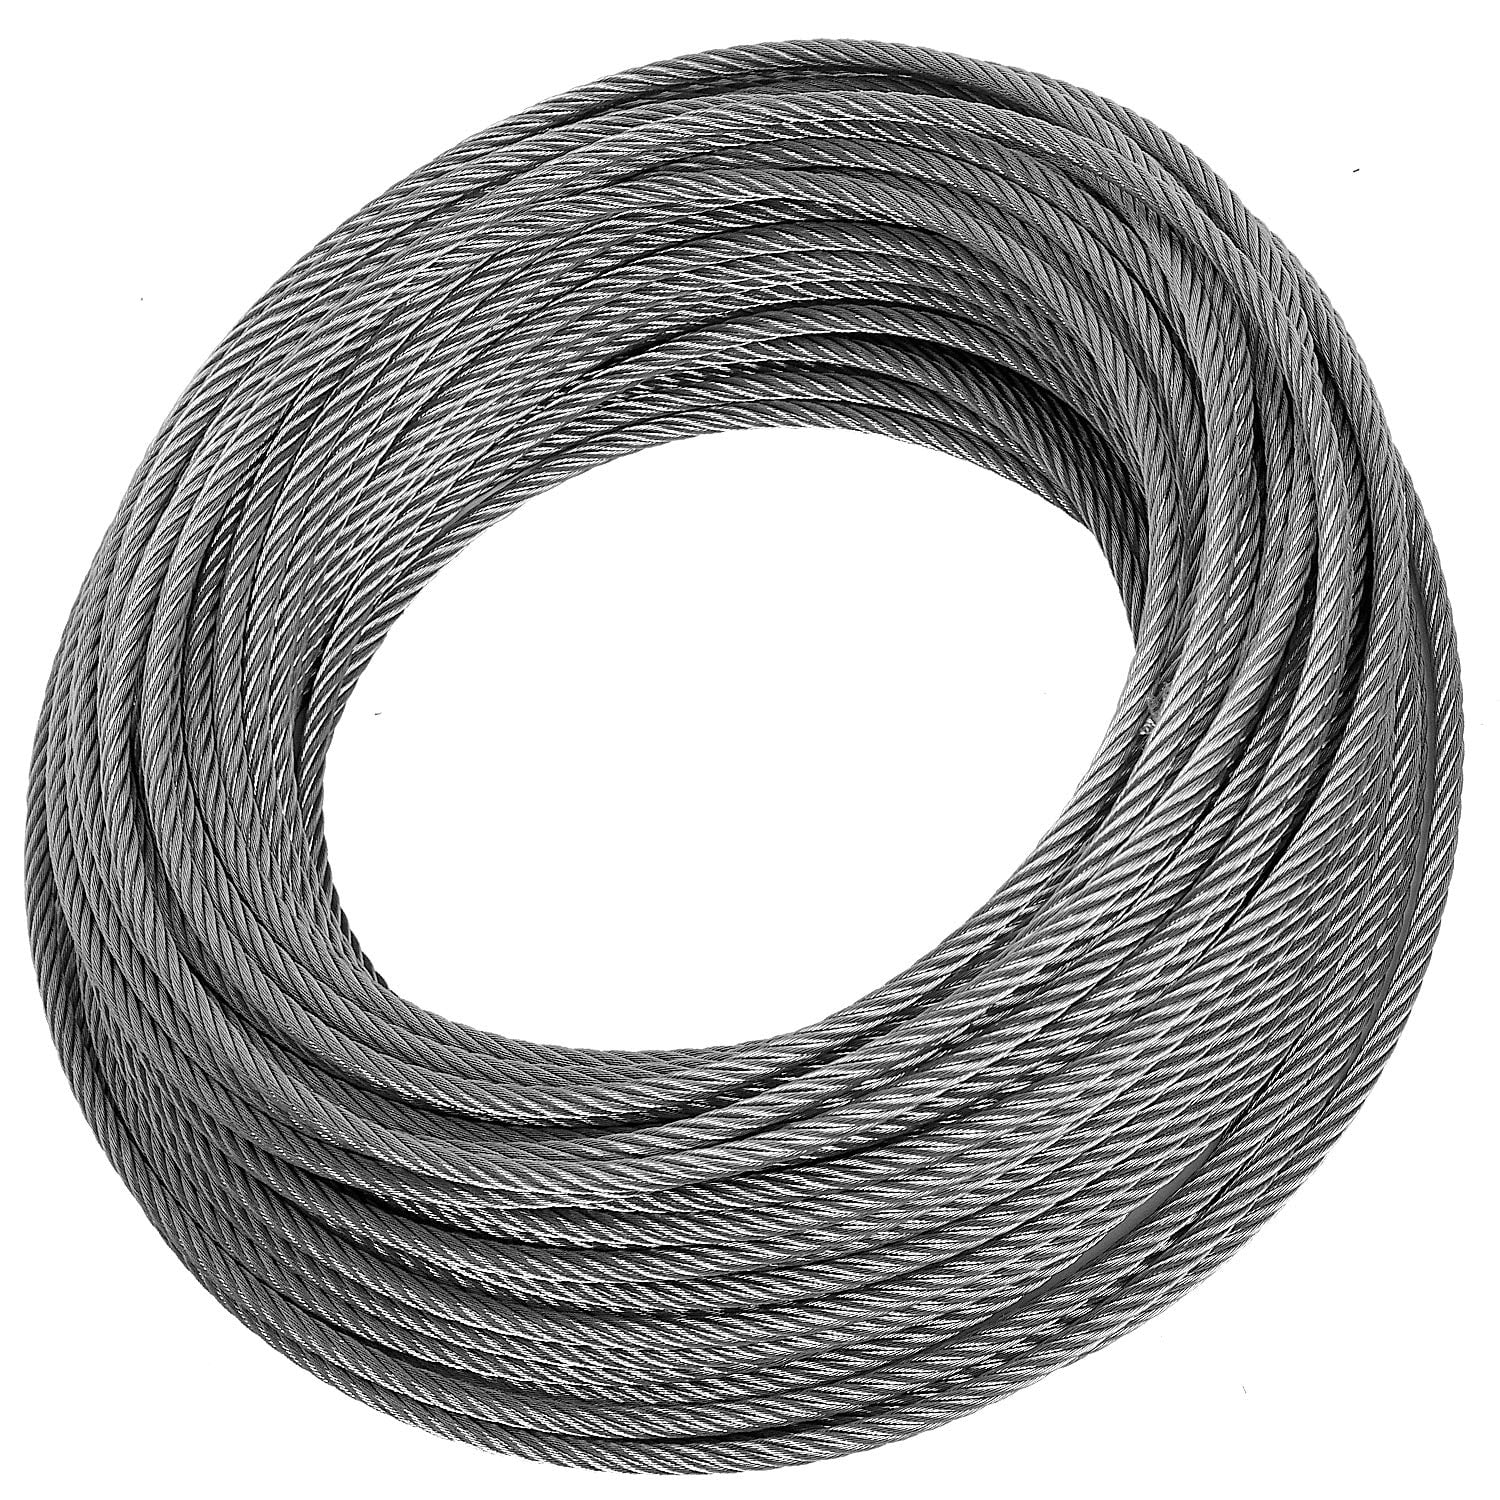 316 Stainless Steel Wire Rope Cable 1/4",7x19 150 ft 